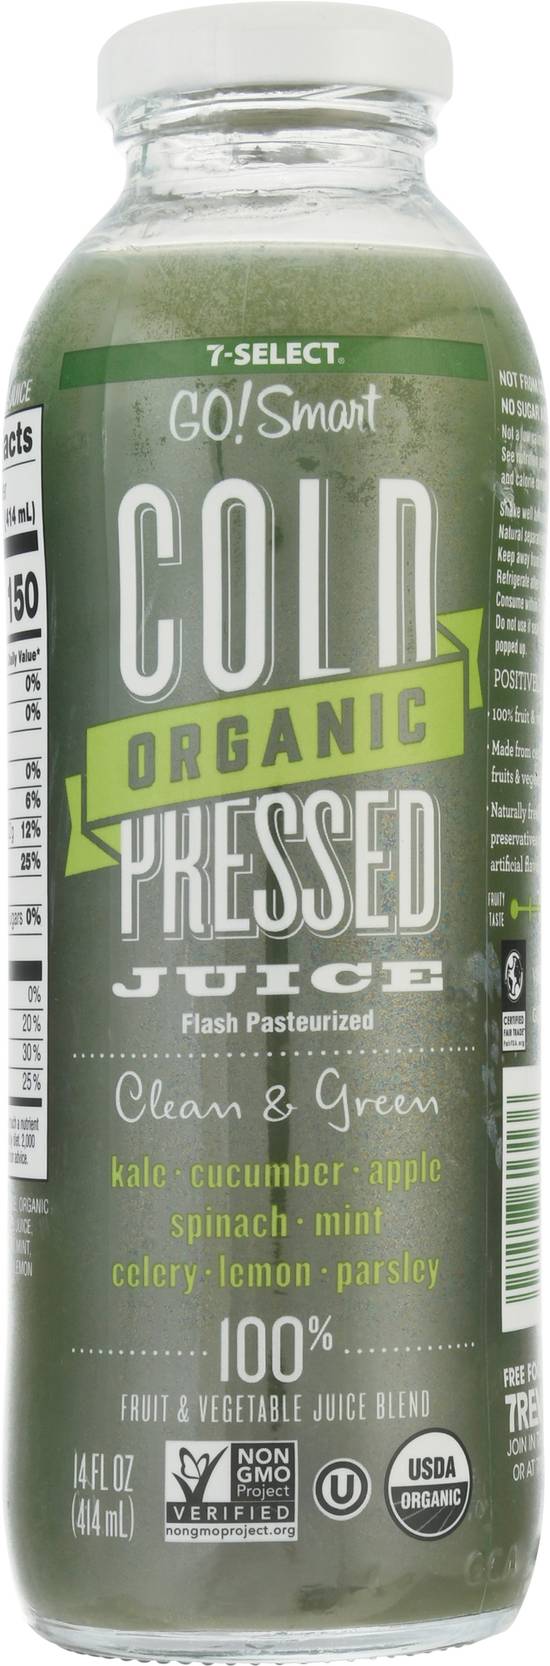 7-Select Organic Clean & Green Cold Pressed Juice (14fl oz)